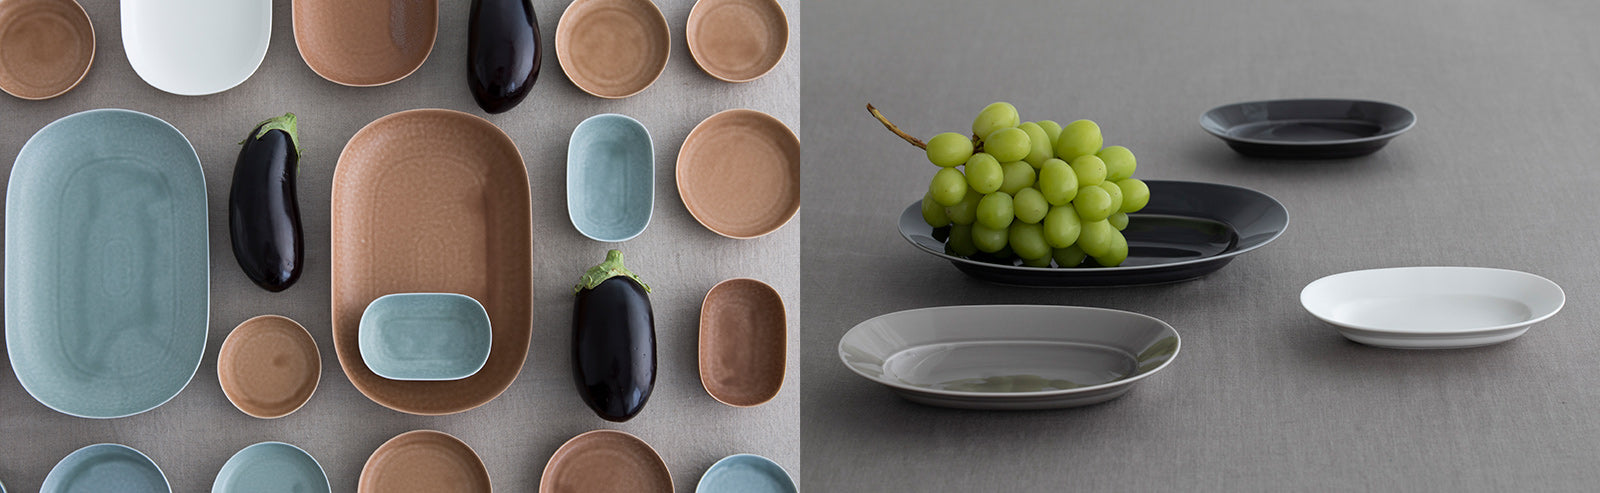 The ceramic series "ReiRABO" is inspired by the traditional Irabo Glaze